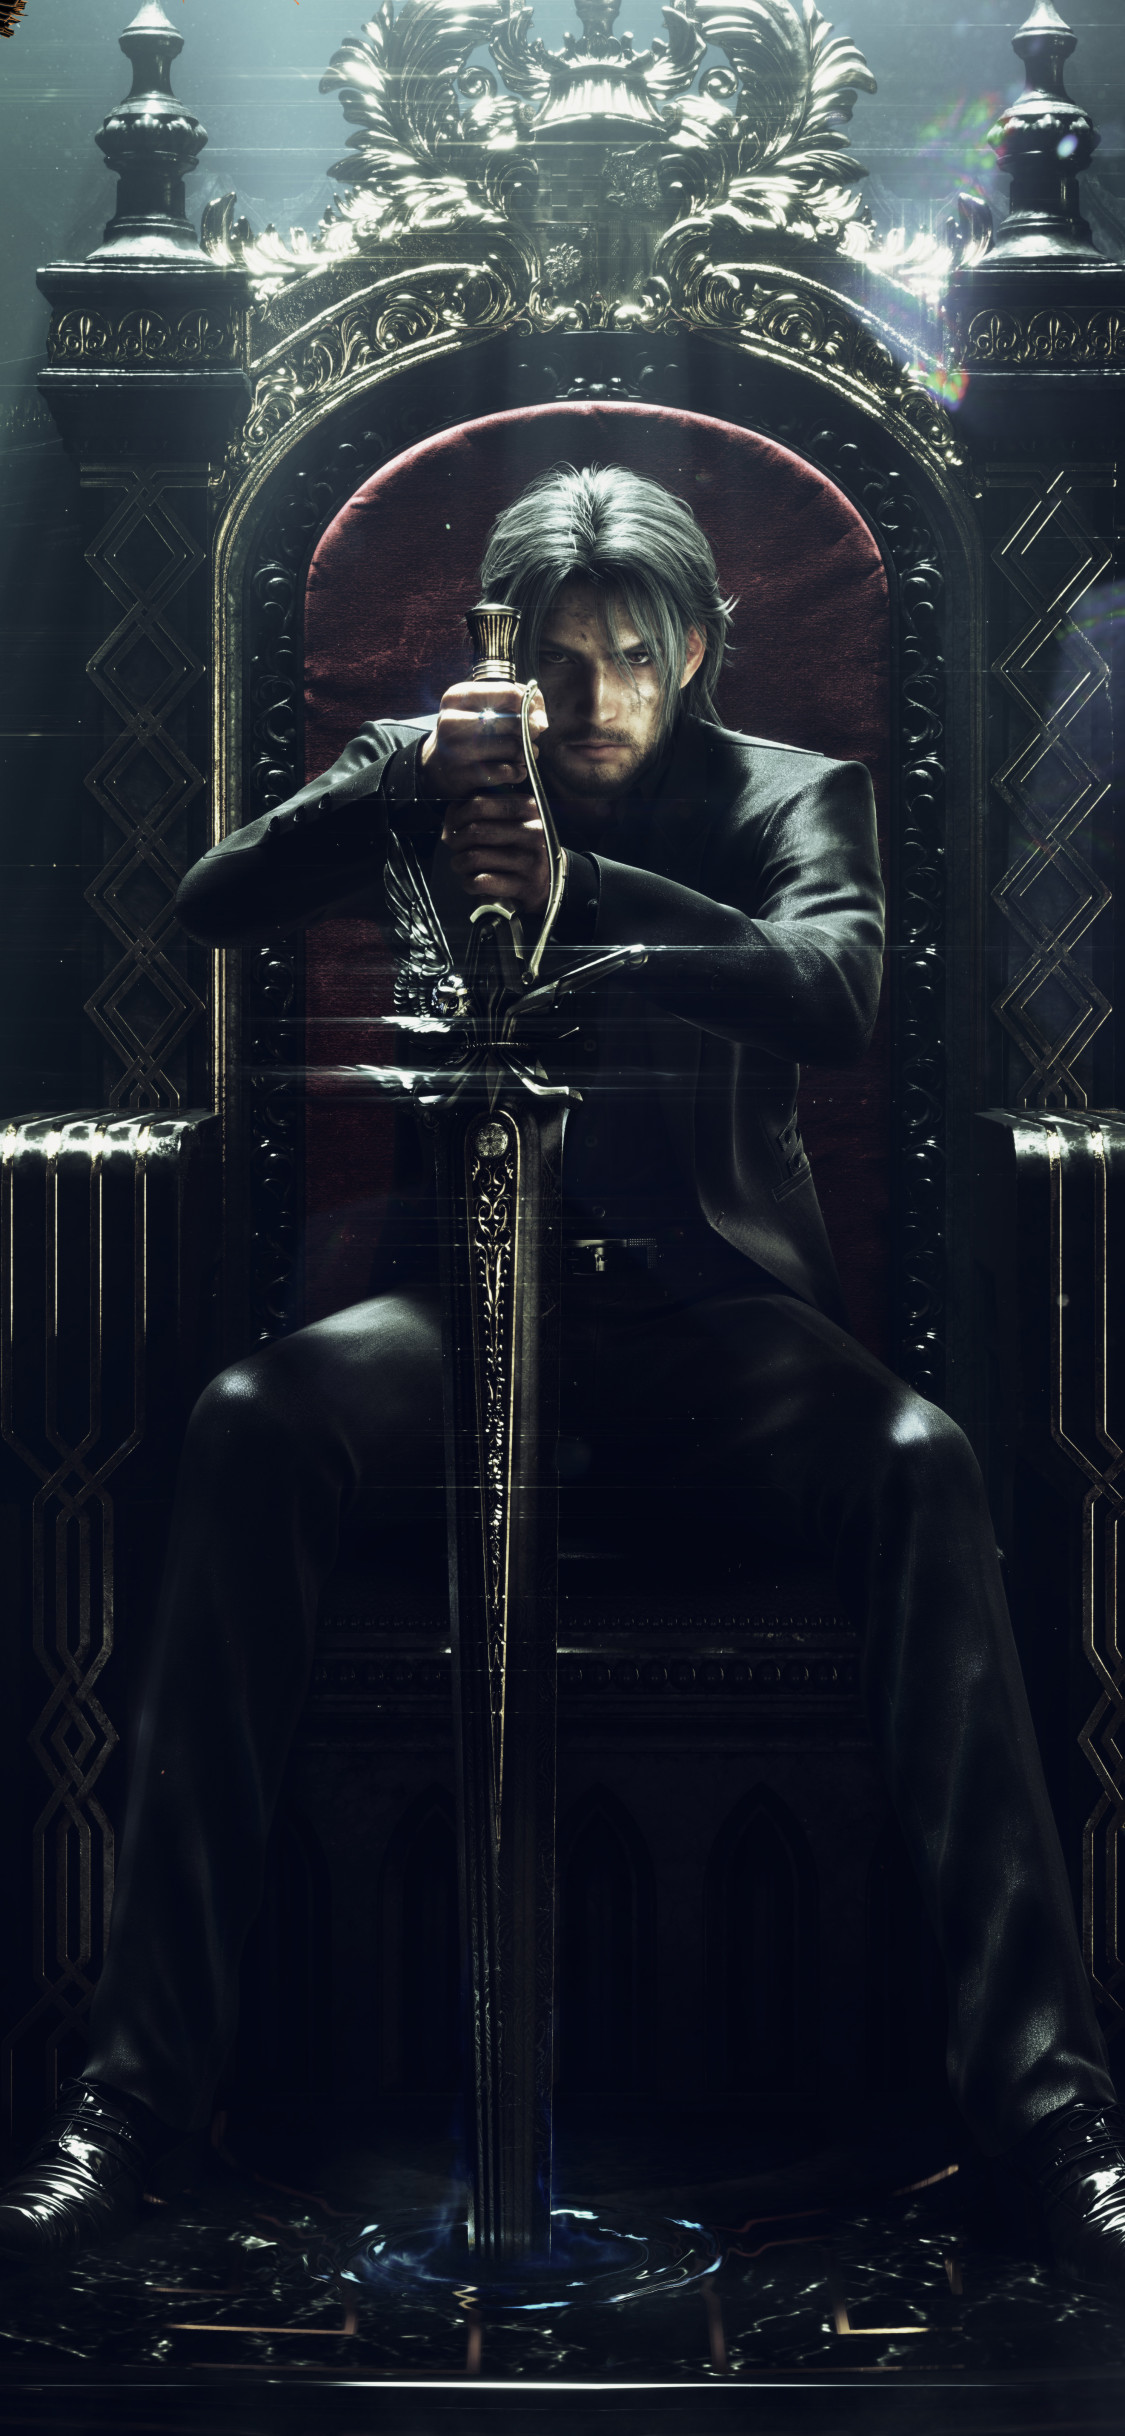 final fantasy xv iphone wallpaper,fictional character,leather,movie,darkness